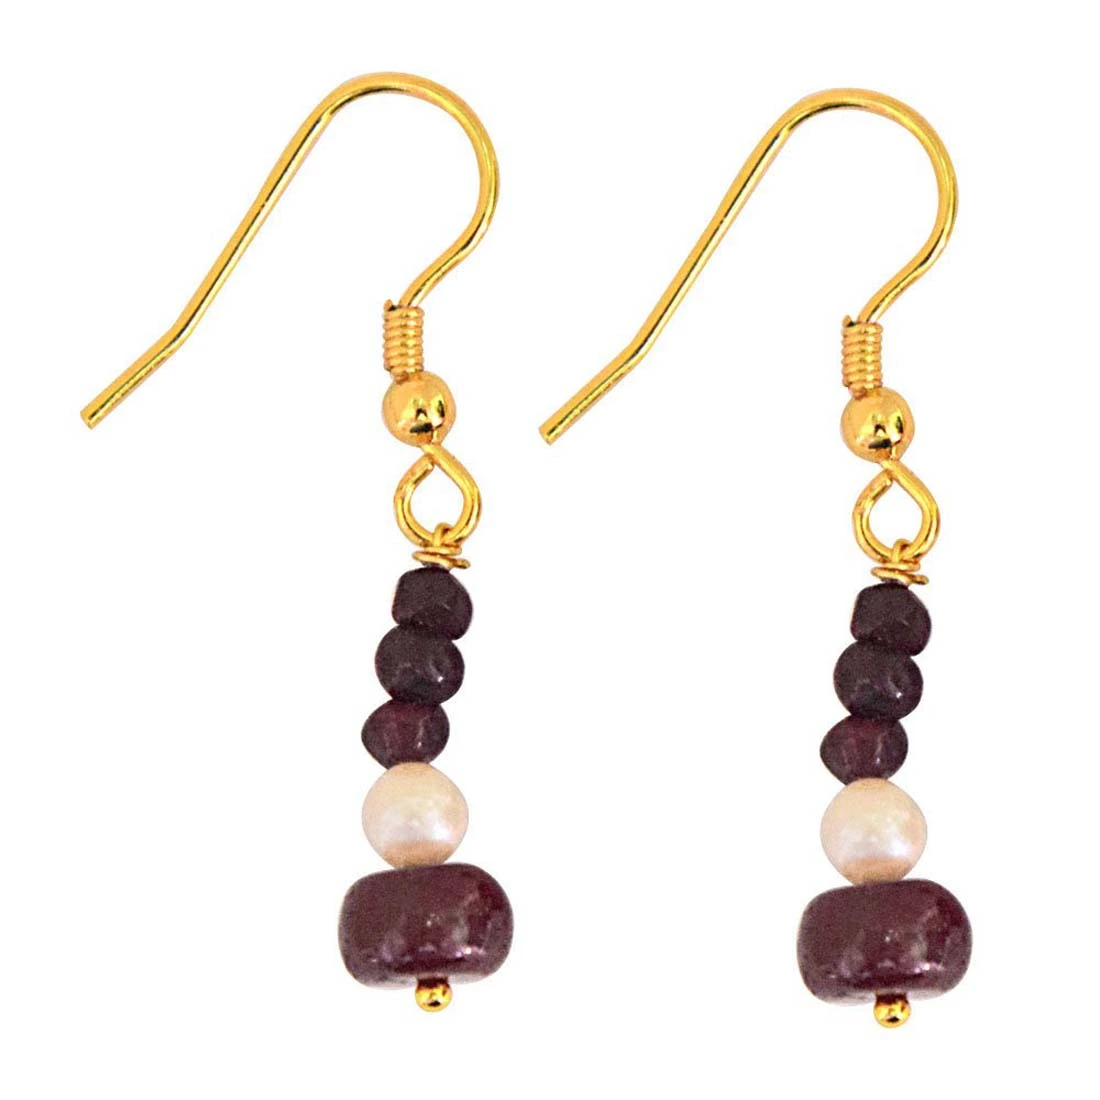 Real Dark Red Ruby Beads & Freshwater Pearl Gold Plated Hanging Earrings for Women (SE238)